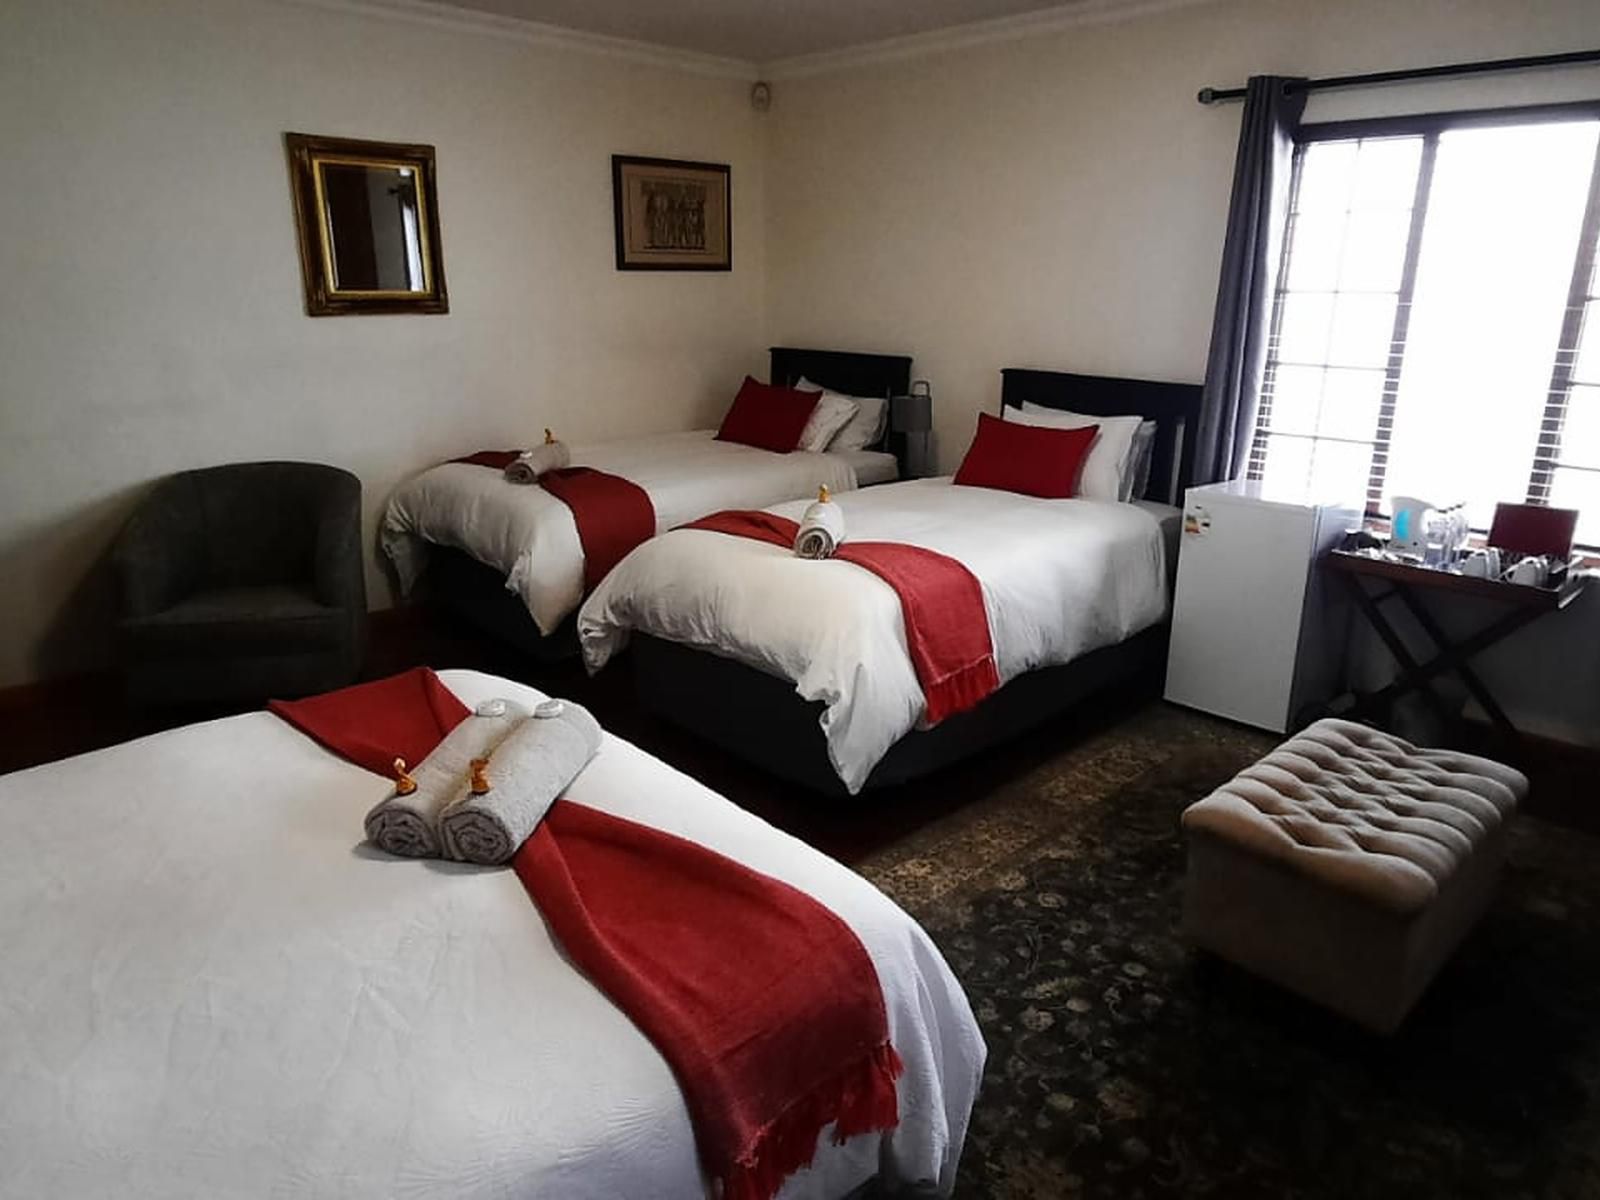 The Oak Potch Guesthouse Die Bult Potchefstroom North West Province South Africa Bedroom